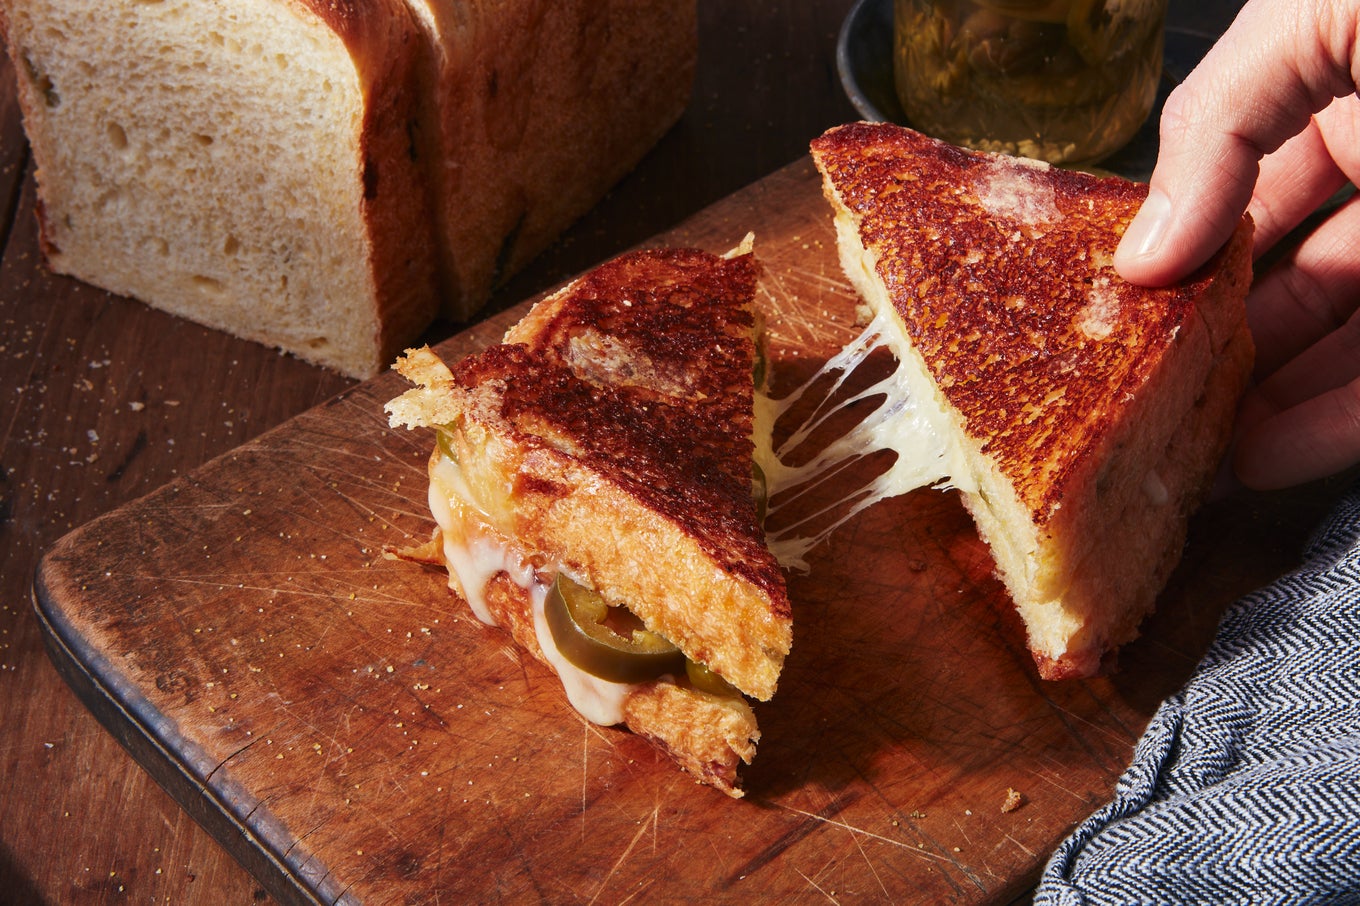 New Subway Sandwiches Reinvent the Grilled Cheese – The News Herald